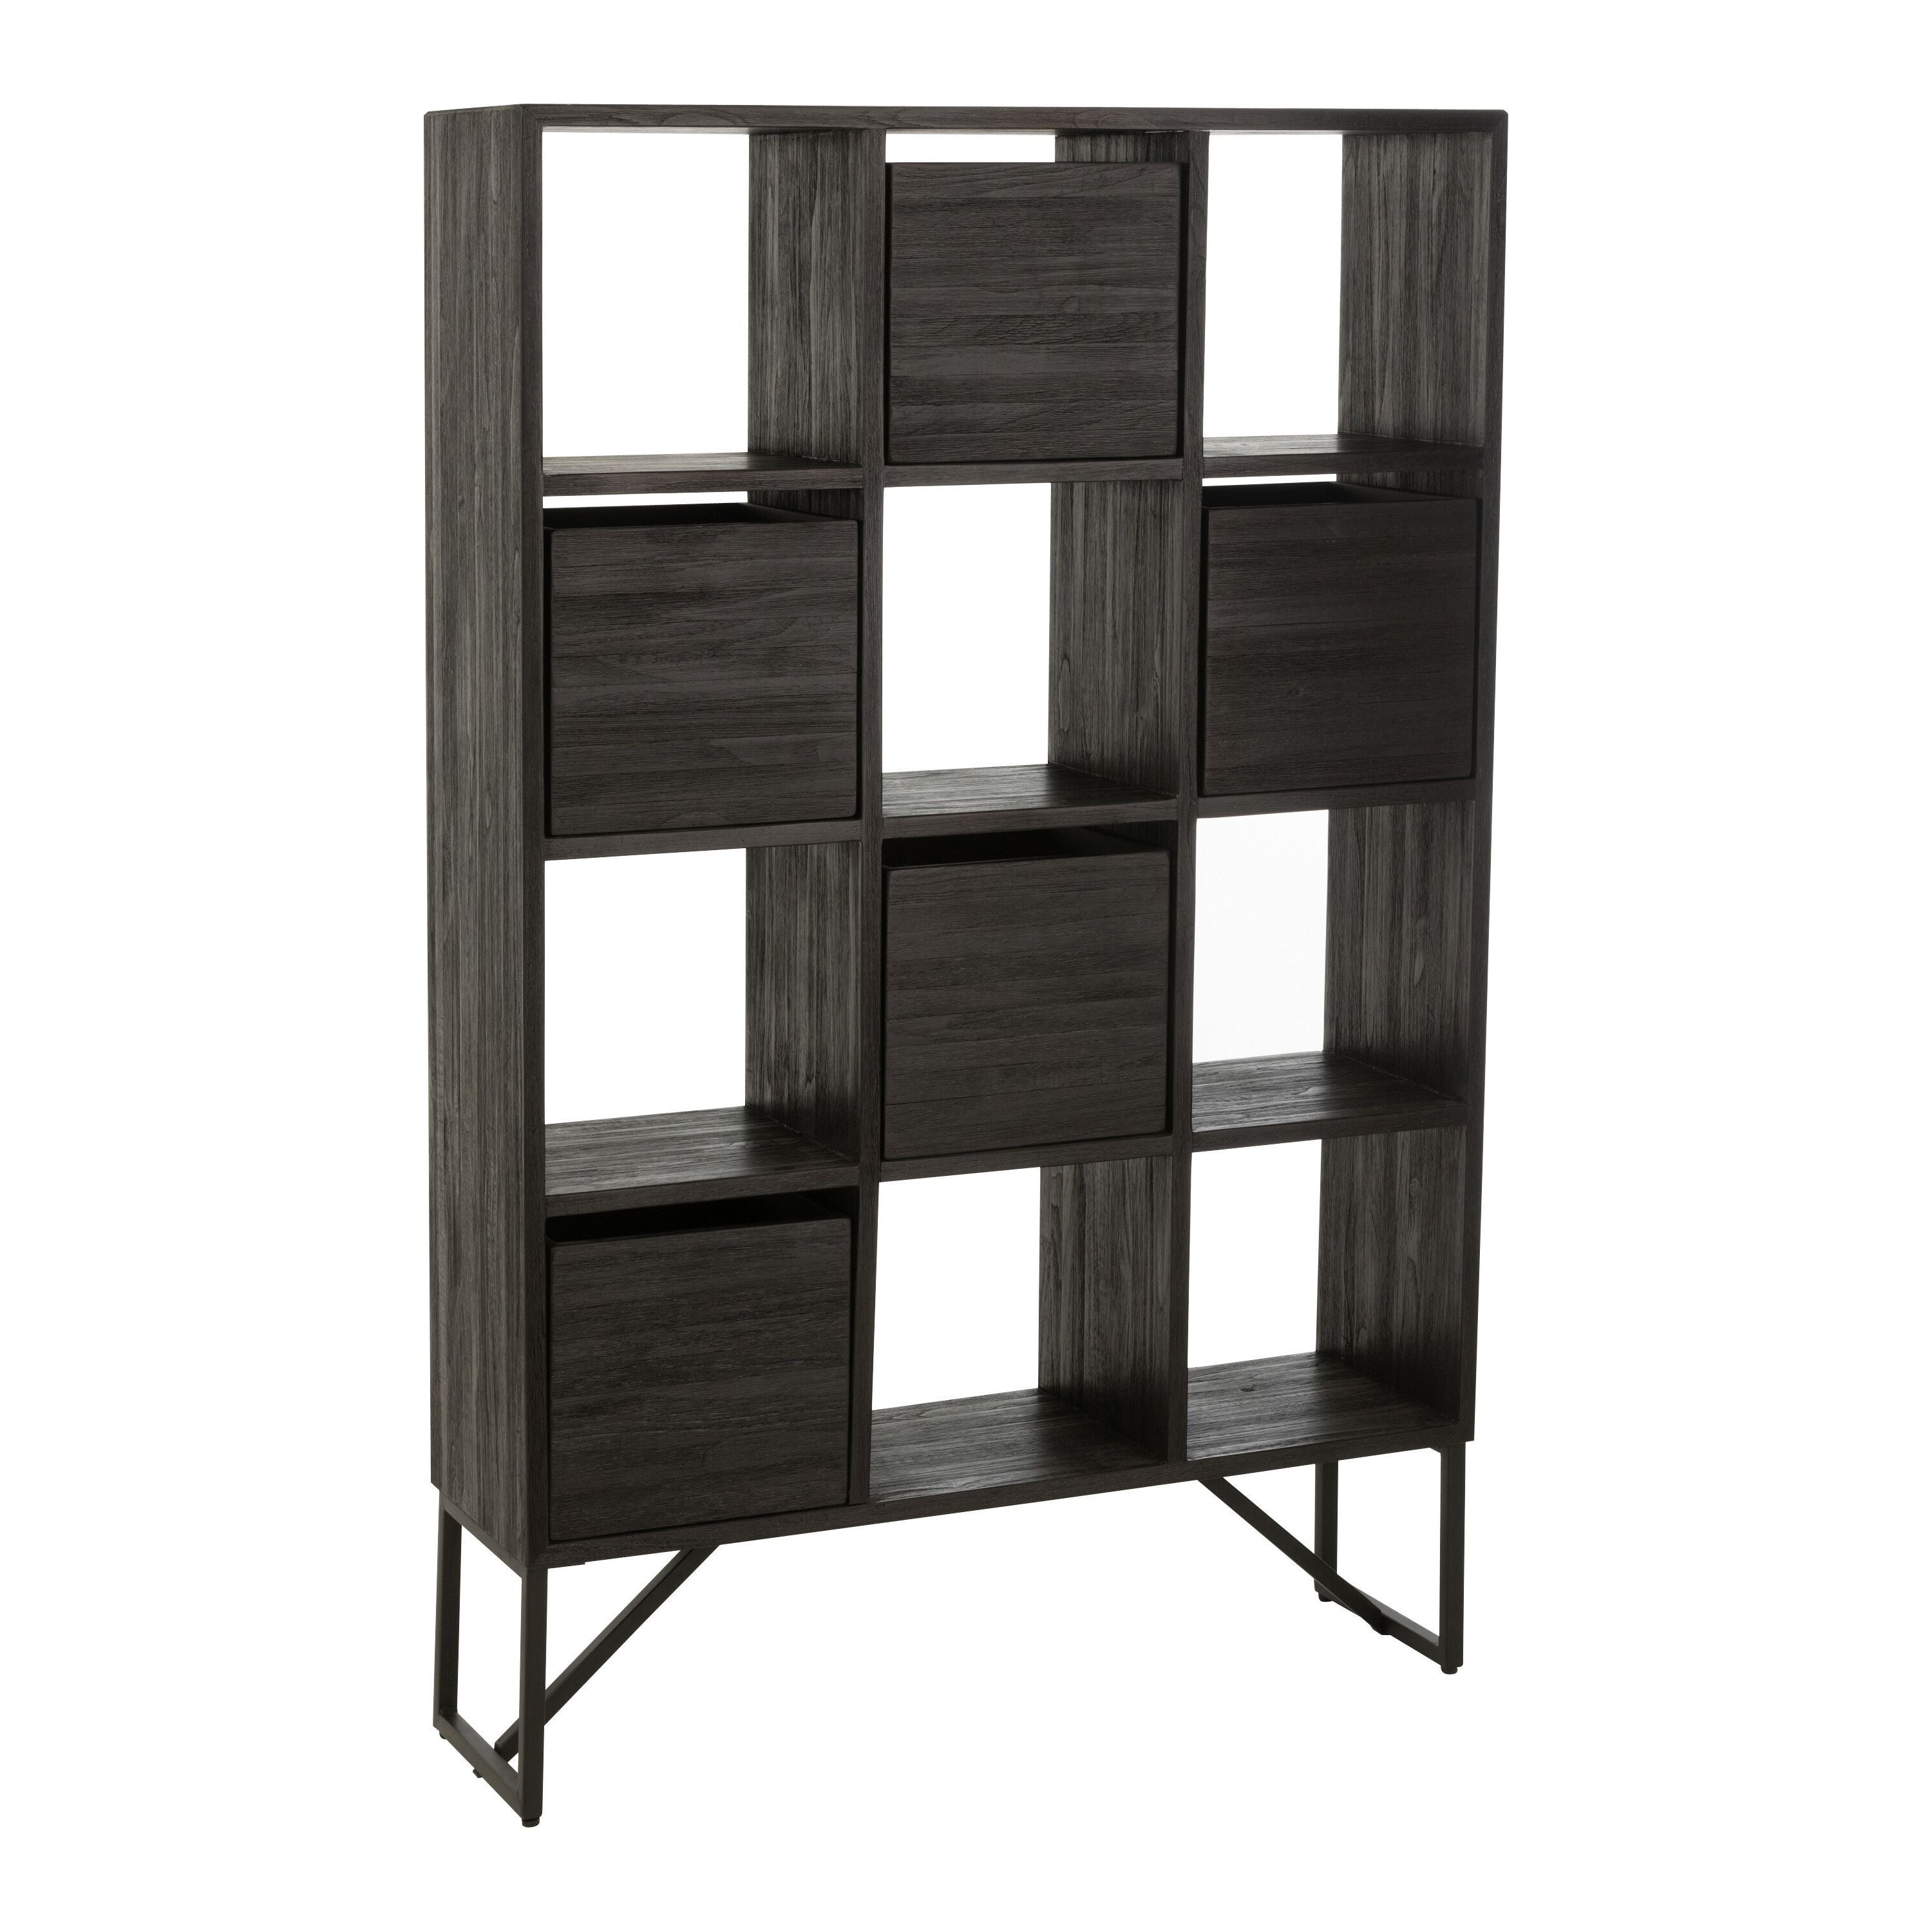 Cabinet With Drawers Recycled Teak Black